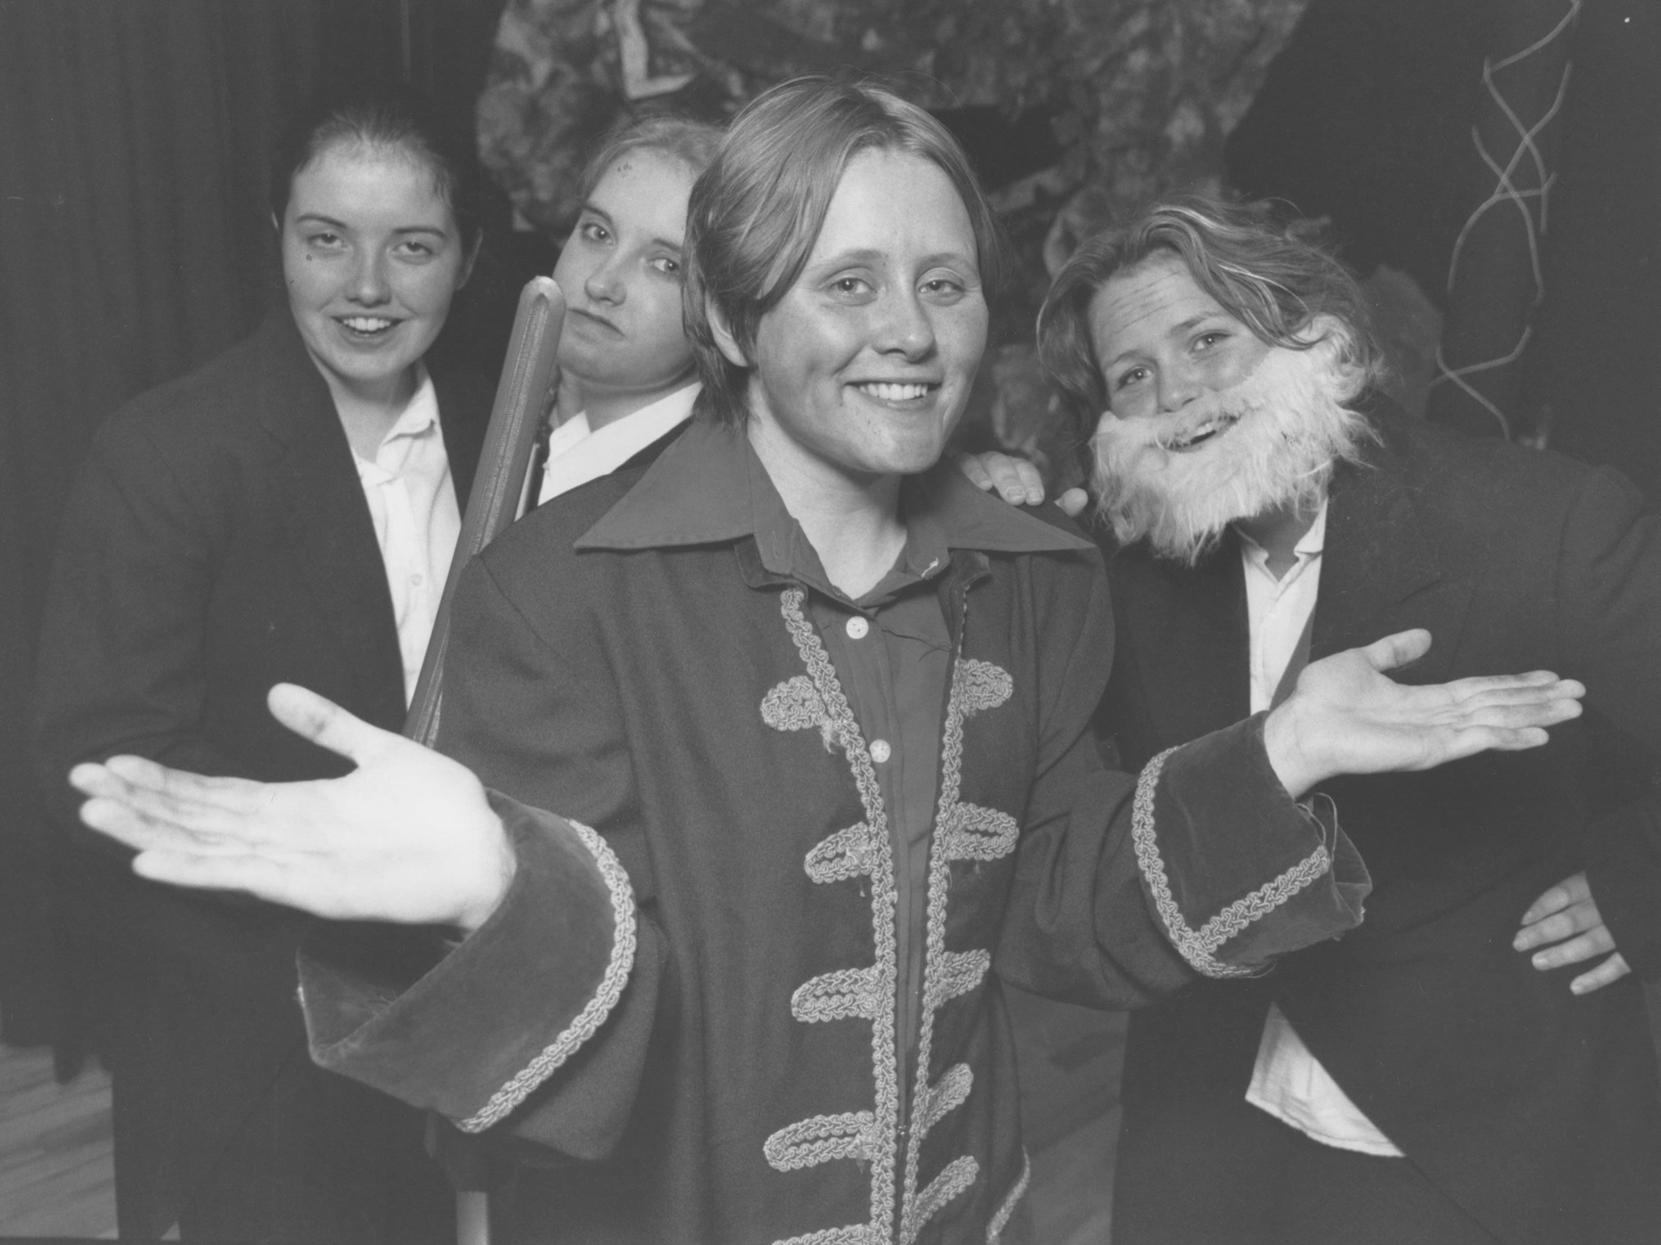 Scarborough Sixth Form College students put on their own production of The Tempest in their own time back in July 1997. Pictured are The Nobles, from left, Antonio (Katharine Williams), Sebastian (Marie Daniels), Alonzo (Sarah Evans), and Gonzalo (Louise Taylor).